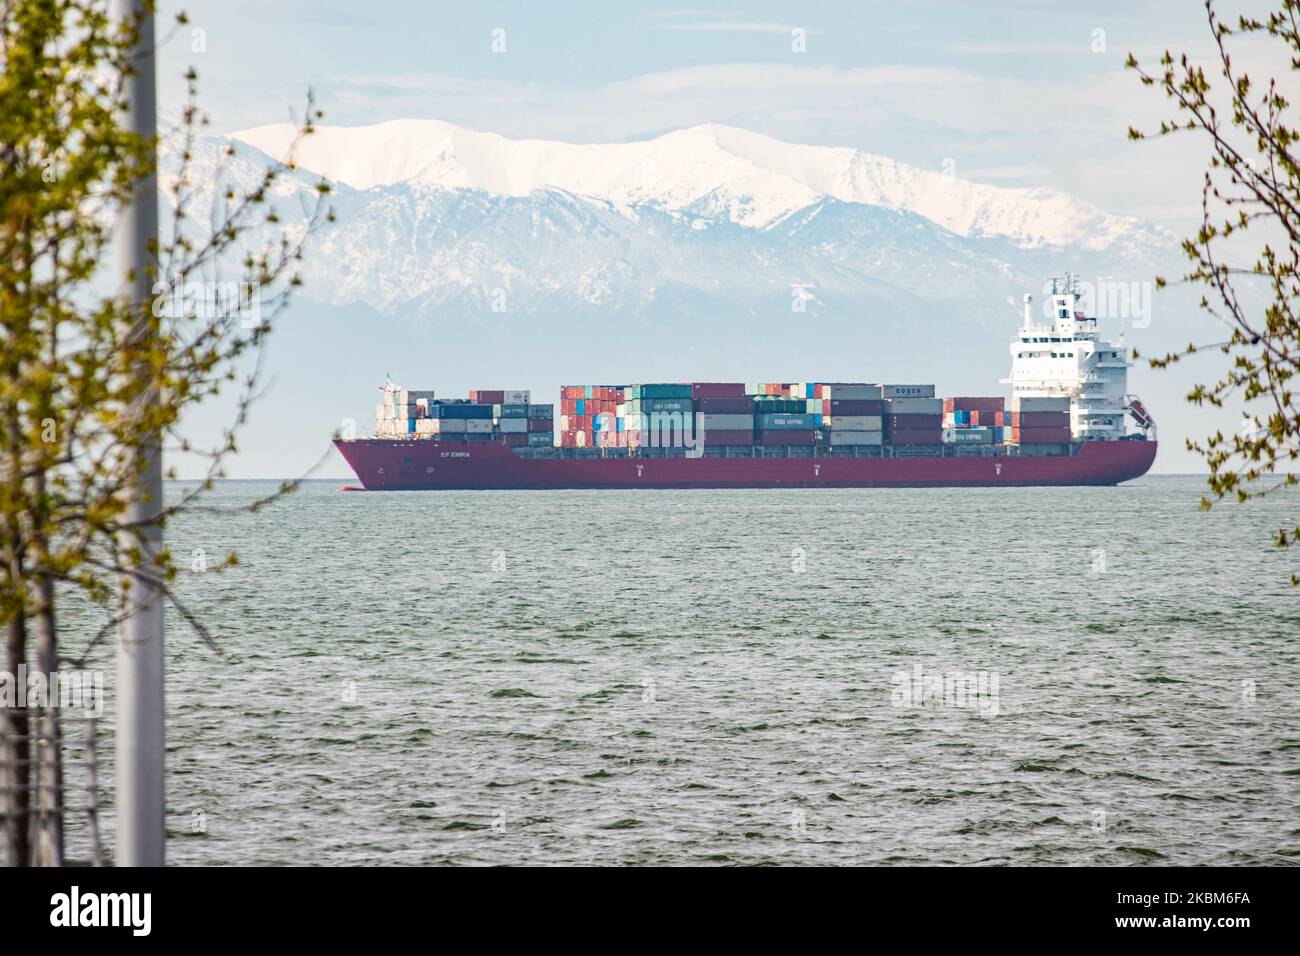 A freight vessel as seen from the seafront of Thessaloniki city anchored at Thermaikos Gulf, Aegean Sea in Greece on April 7, 2020. The cargo ship carries containers shipment and is under the name Ef Emira, with IMO registration number 9357810, sailing under the flag of Marshall Islands. The ship waits to unload its merchandise at the Port of Thessaloniki, the second-largest container port in Greece but there is a delay in the port due to Covid-19 Coronavirus Pandemic. Snow covered Mount Olympus is visible in the background. (Photo by Nicolas Economou/NurPhoto) Stock Photo